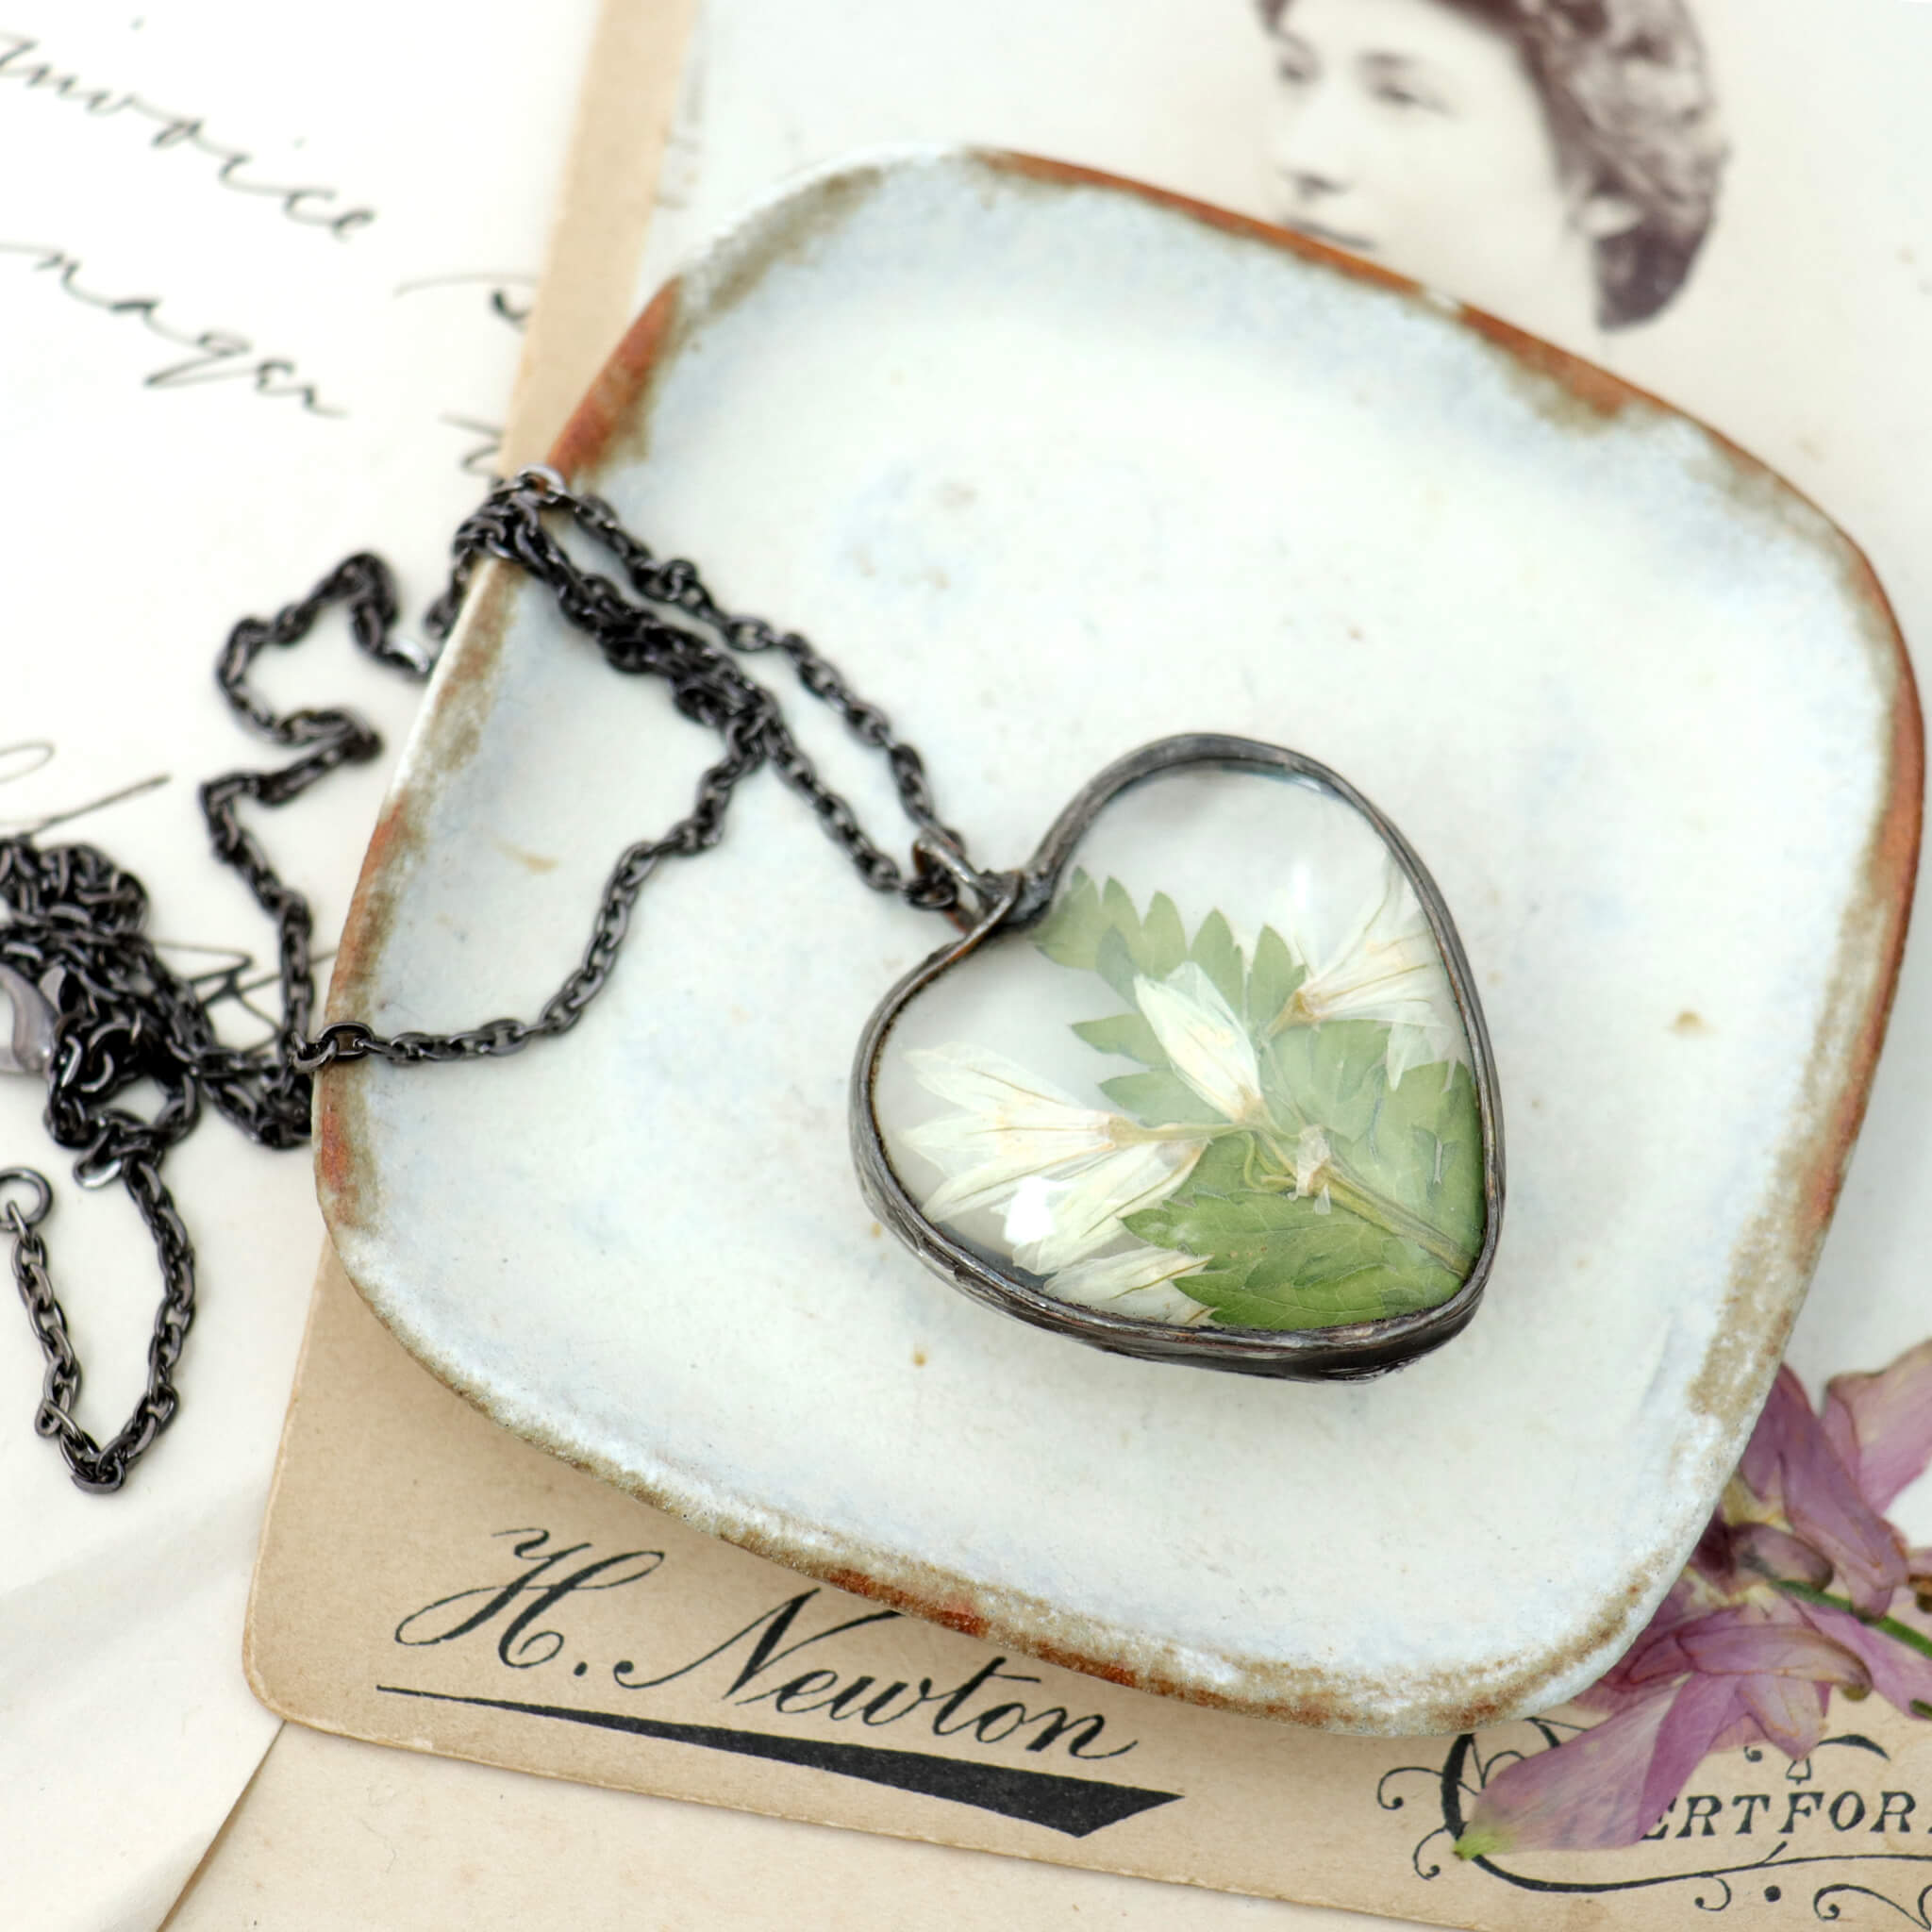 Stained glass style pressed flowers necklace lying on a white dish